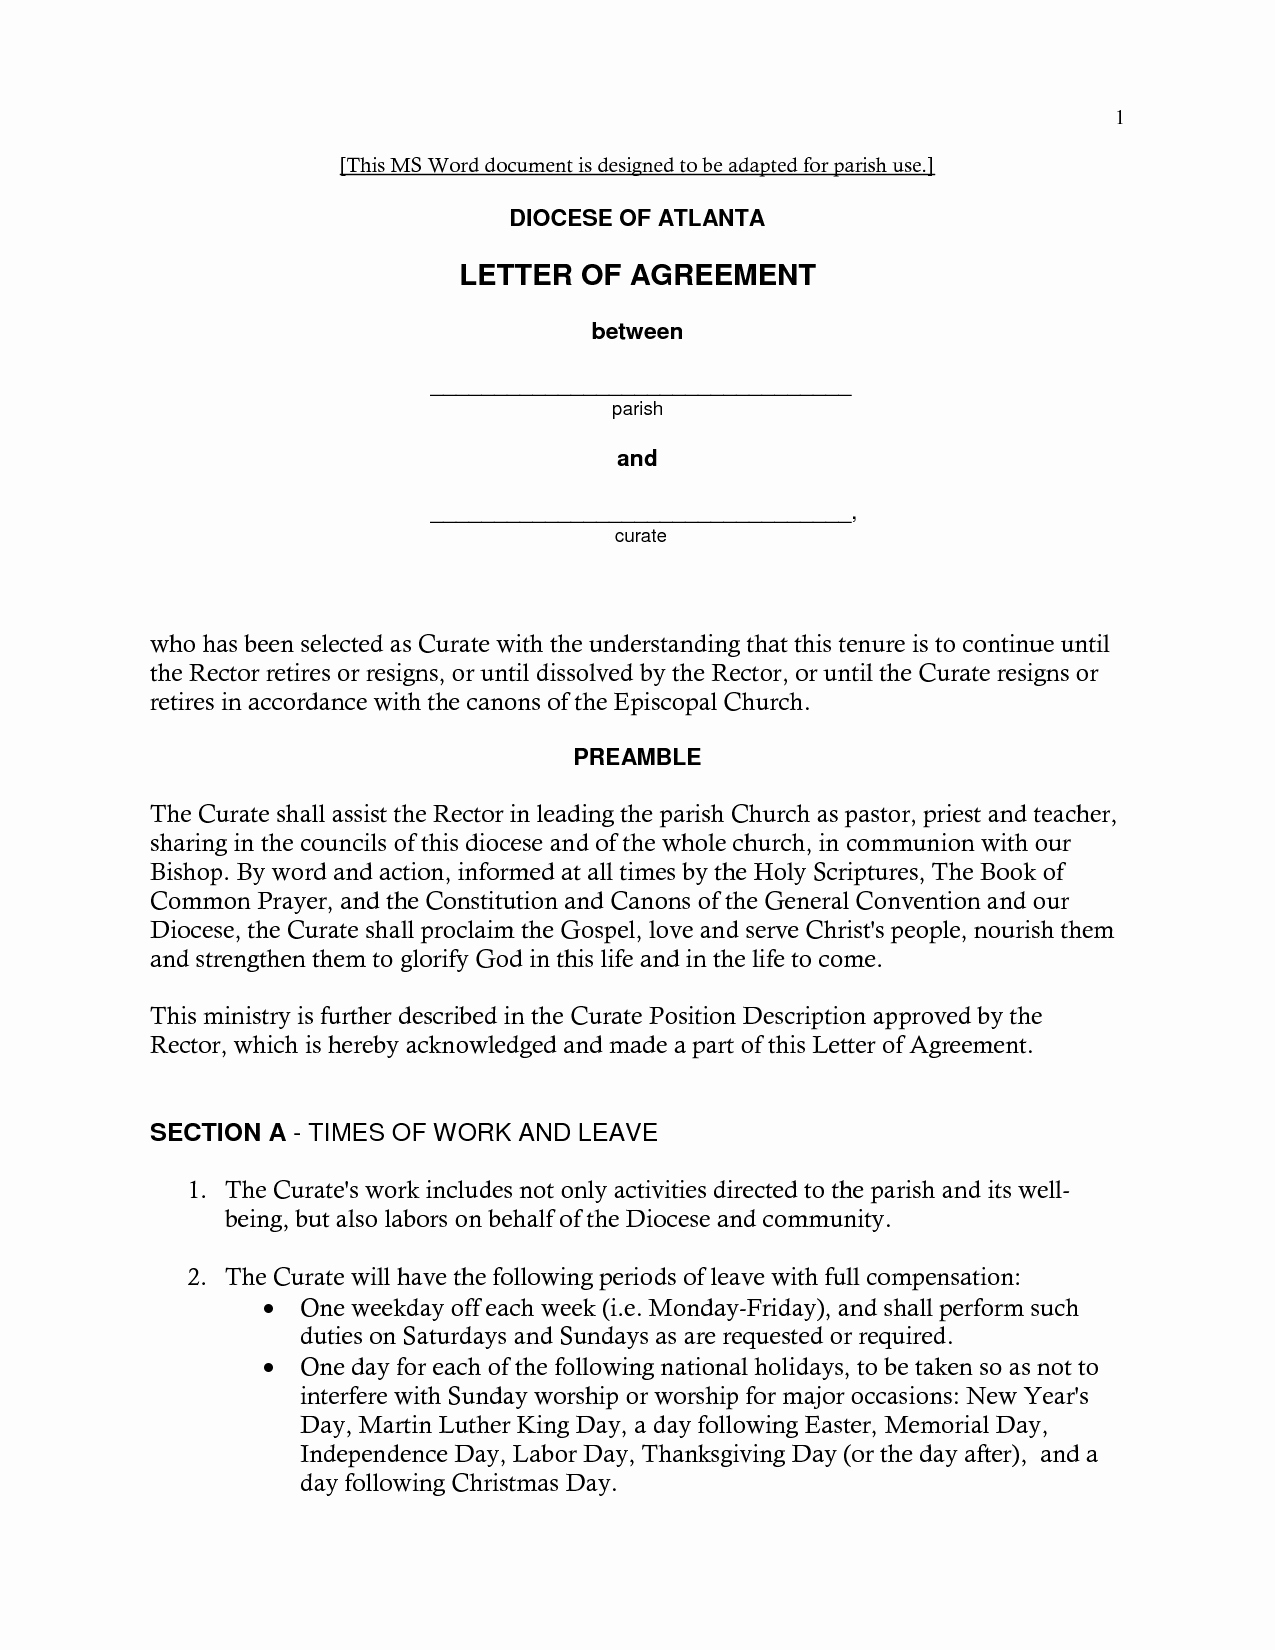 Real Estate Introduction Letter to Friends Template - Real Estate Introduction Letter to Friends Template Beautiful Letter